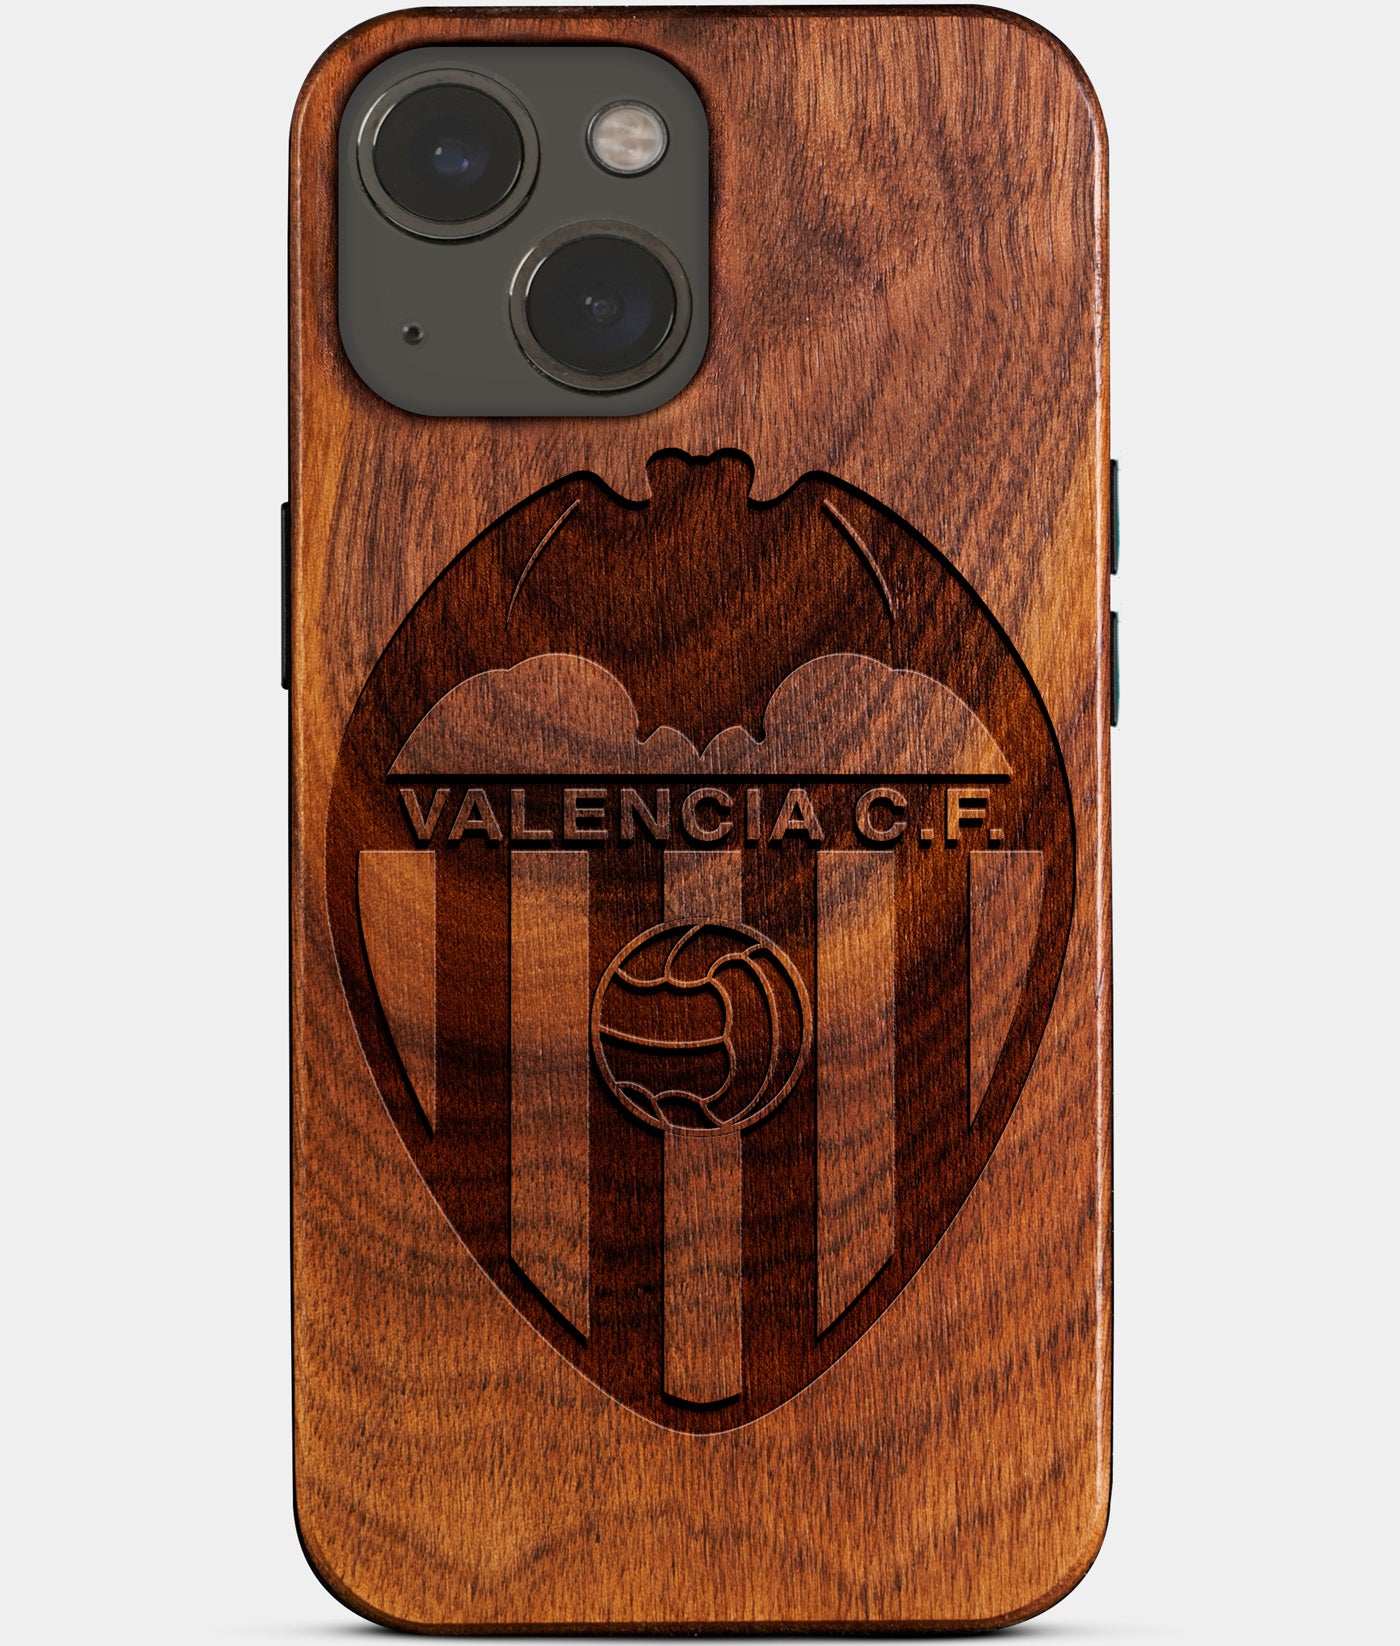 Custom Valencia CF iPhone 14 Plus Cases - Valencia CF Personalized iPhone 14 Plus Cover - Valencia Spain Football Club Valencia CF Birthday Gifts For Men 2022 Best Valencia CF Christmas Gifts Wood unique Valencia CF Gift For Him Monogrammed